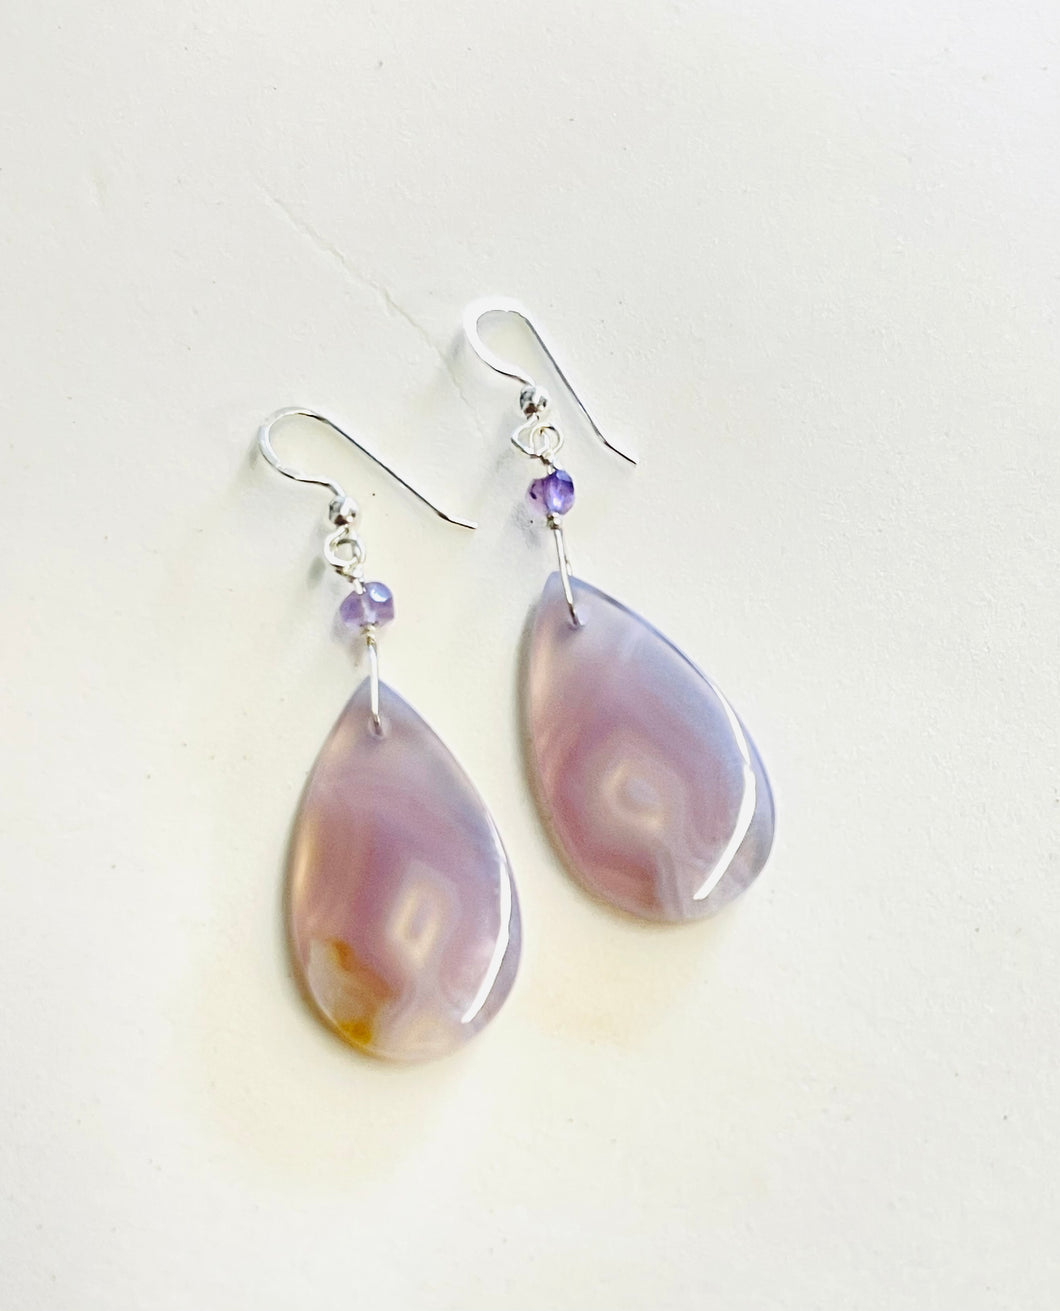 Earrings with blue Lace Agate